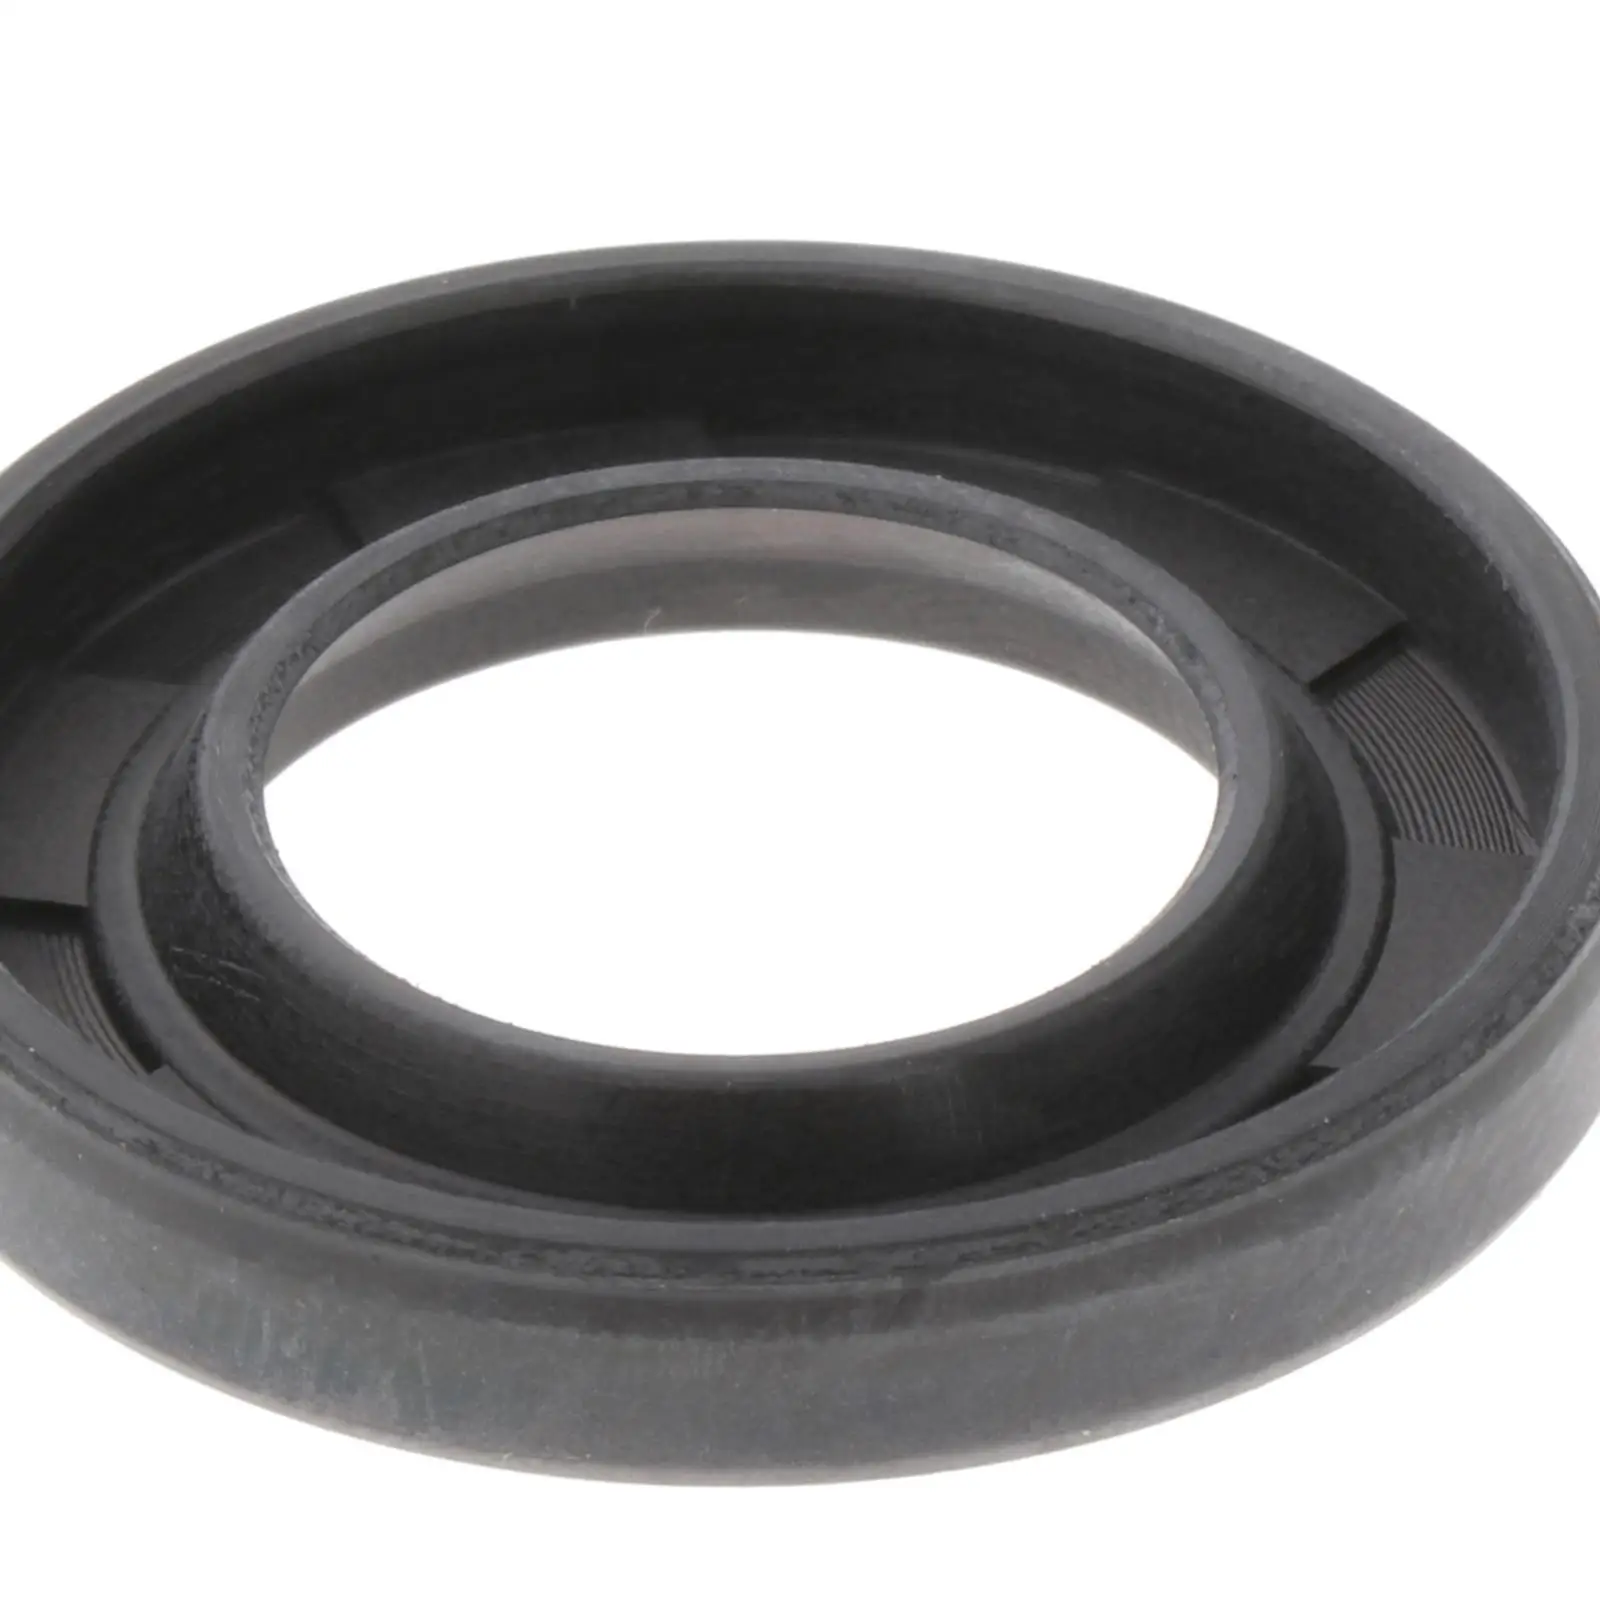 Oil Seal Direct Replaces for Yamaha Outboard 60HP 70HP Outboard Engine